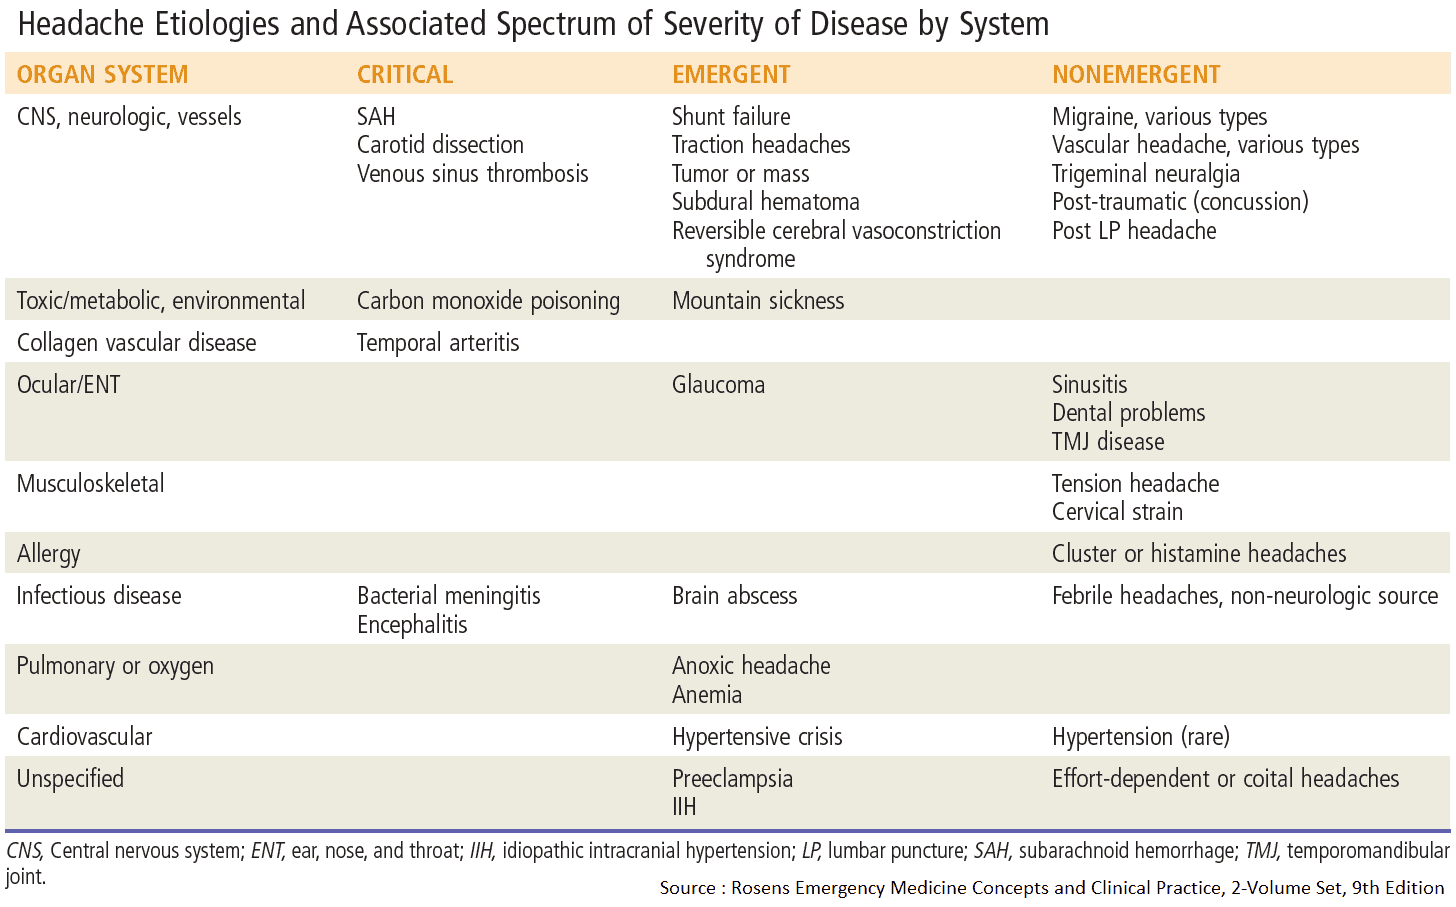 Headache Etiologies and Associated Spectrum of Severity of Disease by System